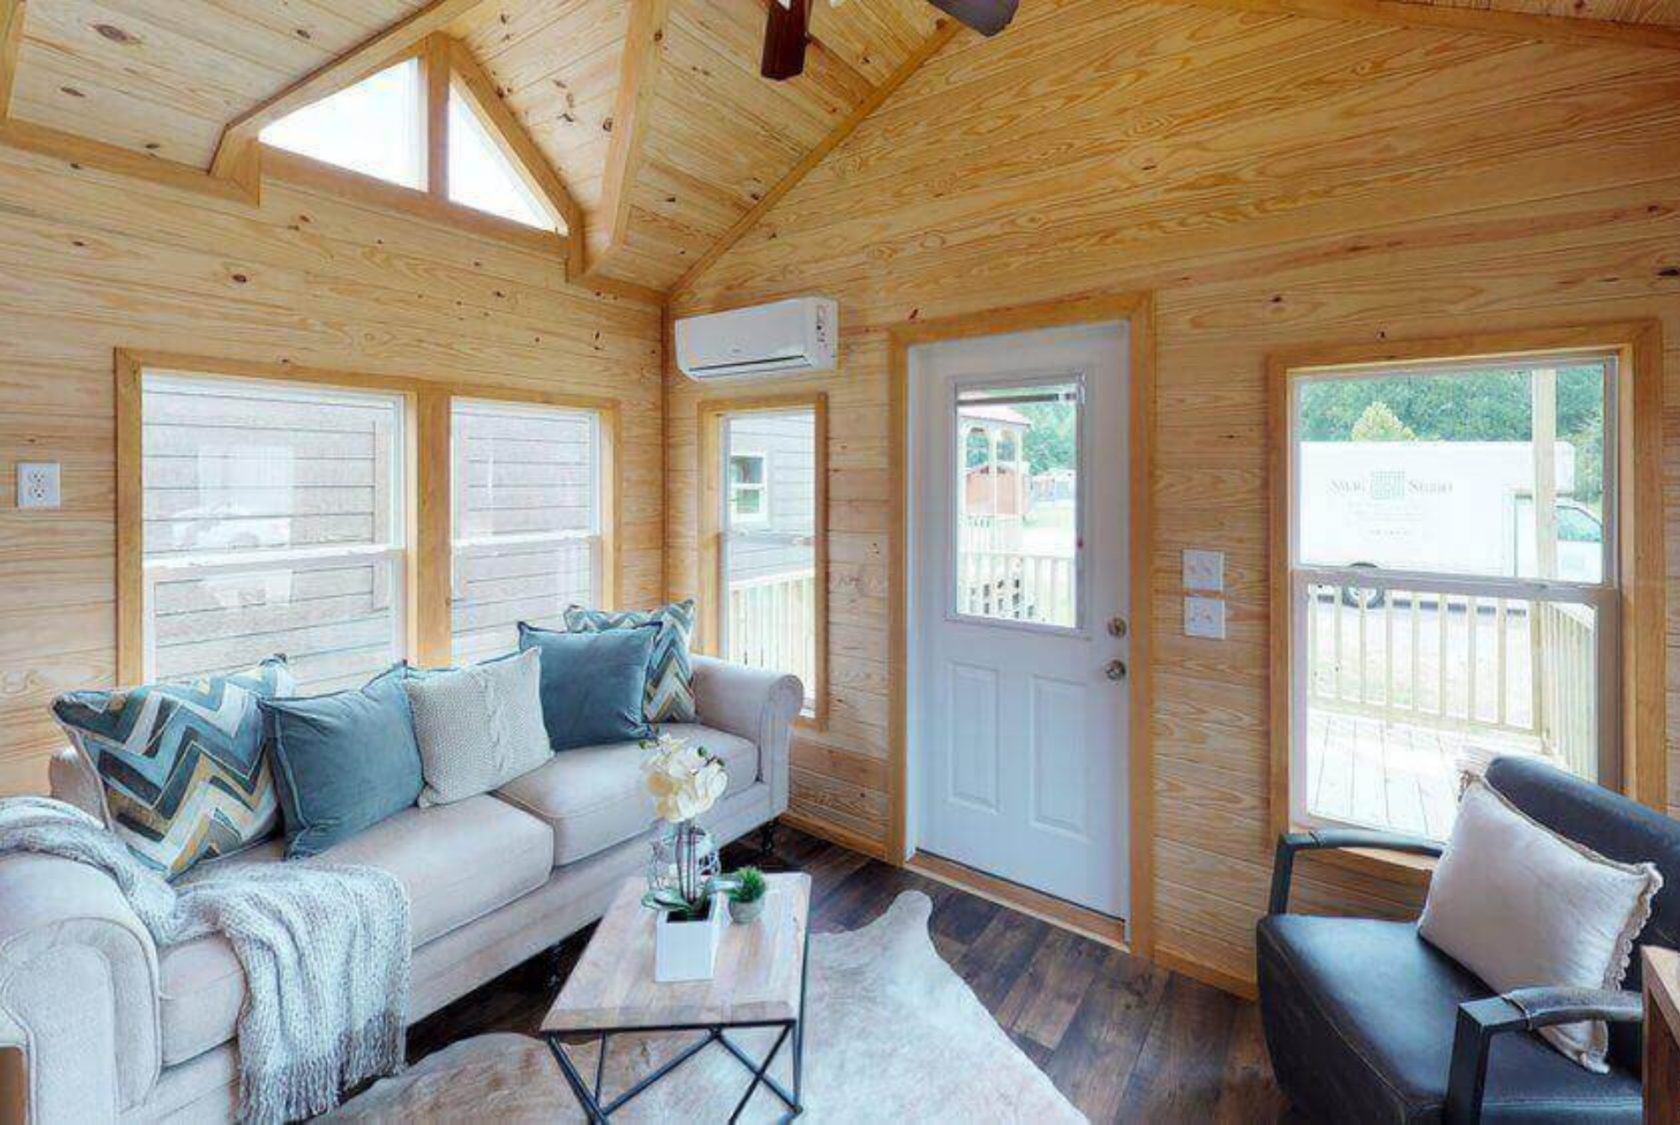 Echoe tiny home living room with shiplap walls.